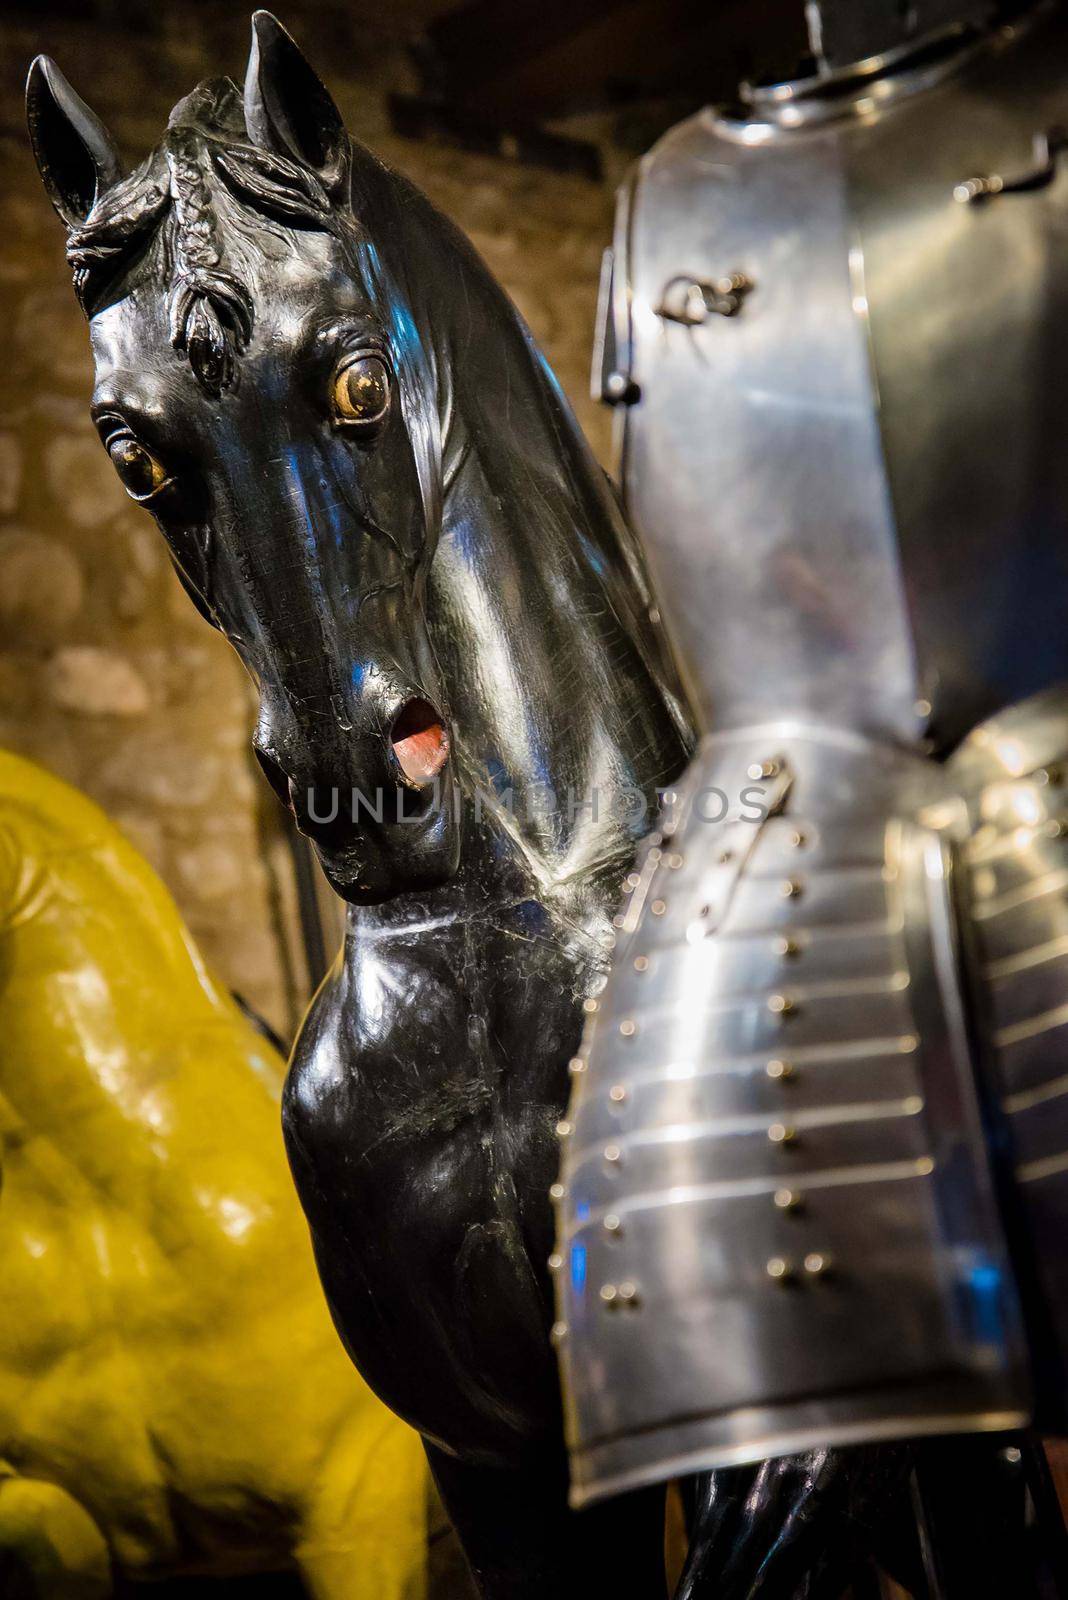 Close up of metal horse head armor statue medieval times era